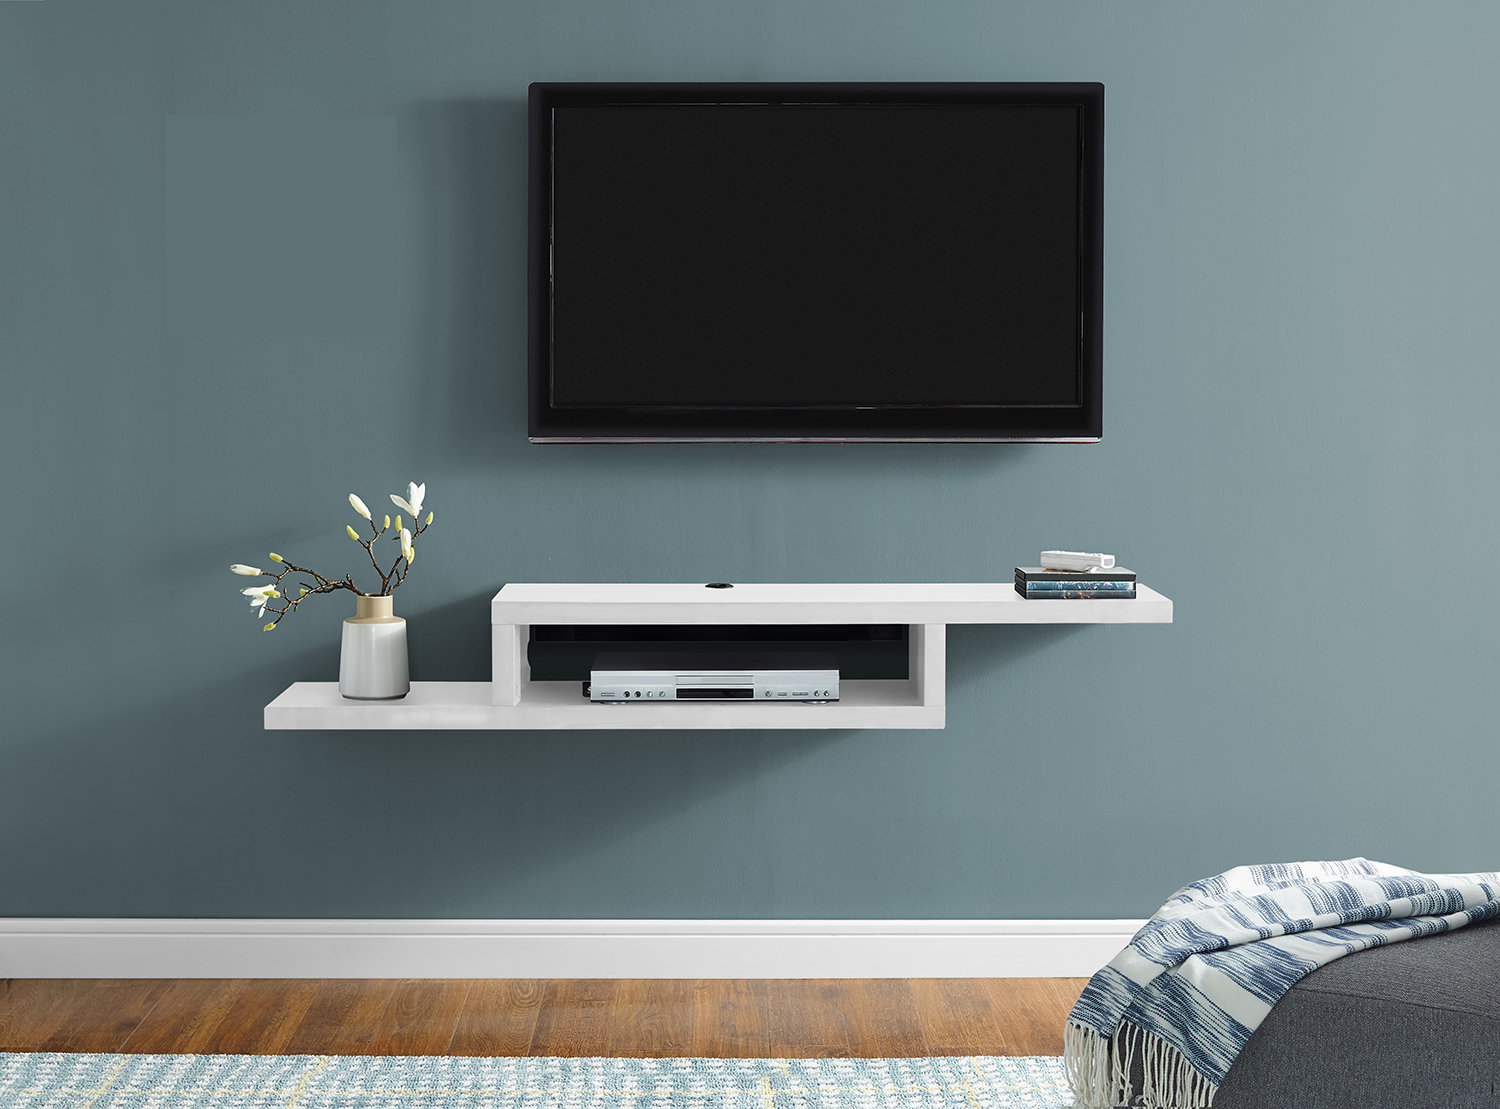 Details about   Cabinet Media Center TV Stand Entertainment Furniture Modern White Shelf LED T39 